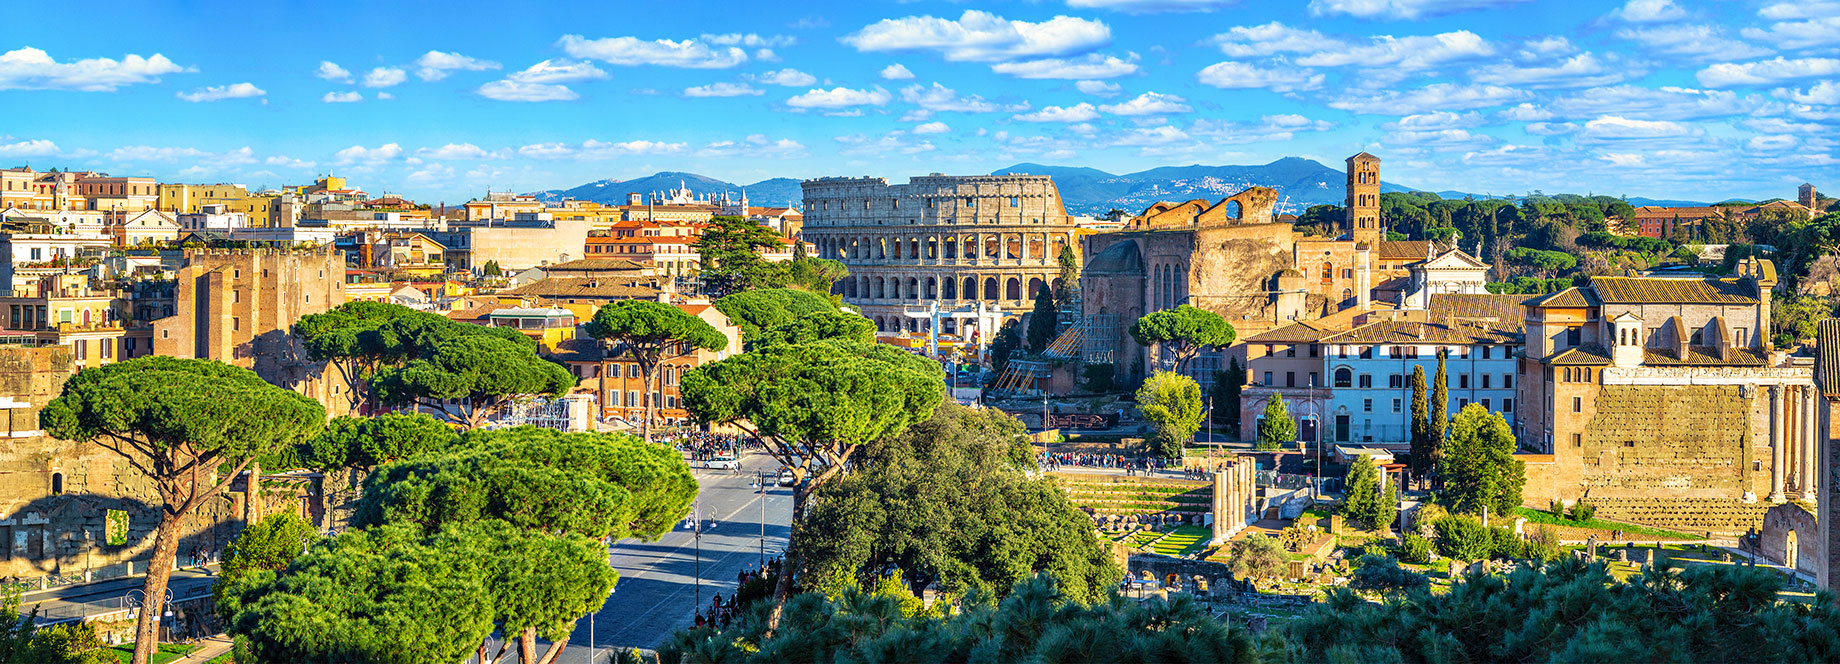 Panorama View of Rome, Italy - Colosseum and Roman Forum